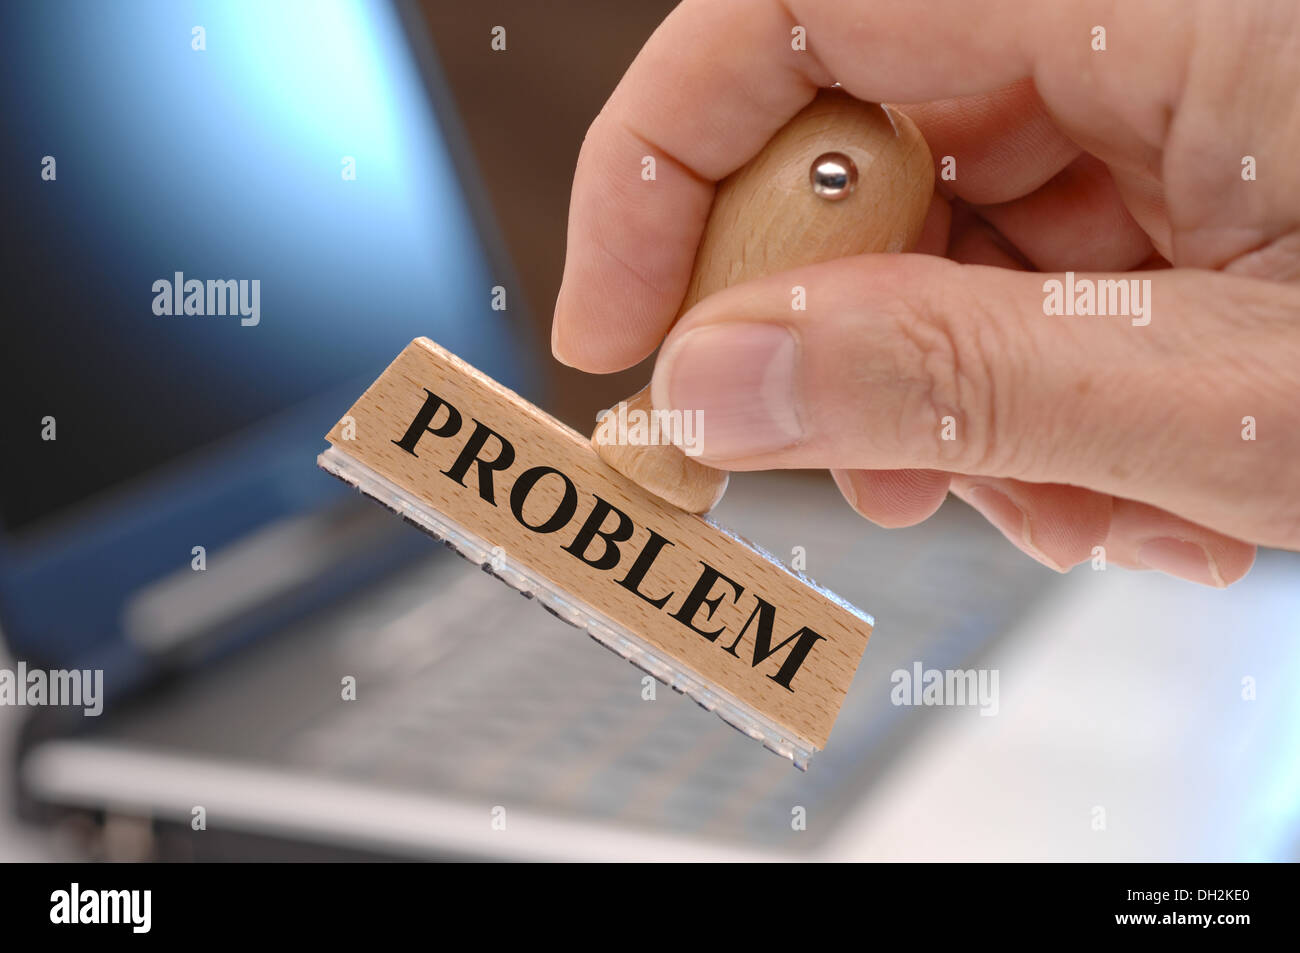 problem marked on rubber stamp Stock Photo